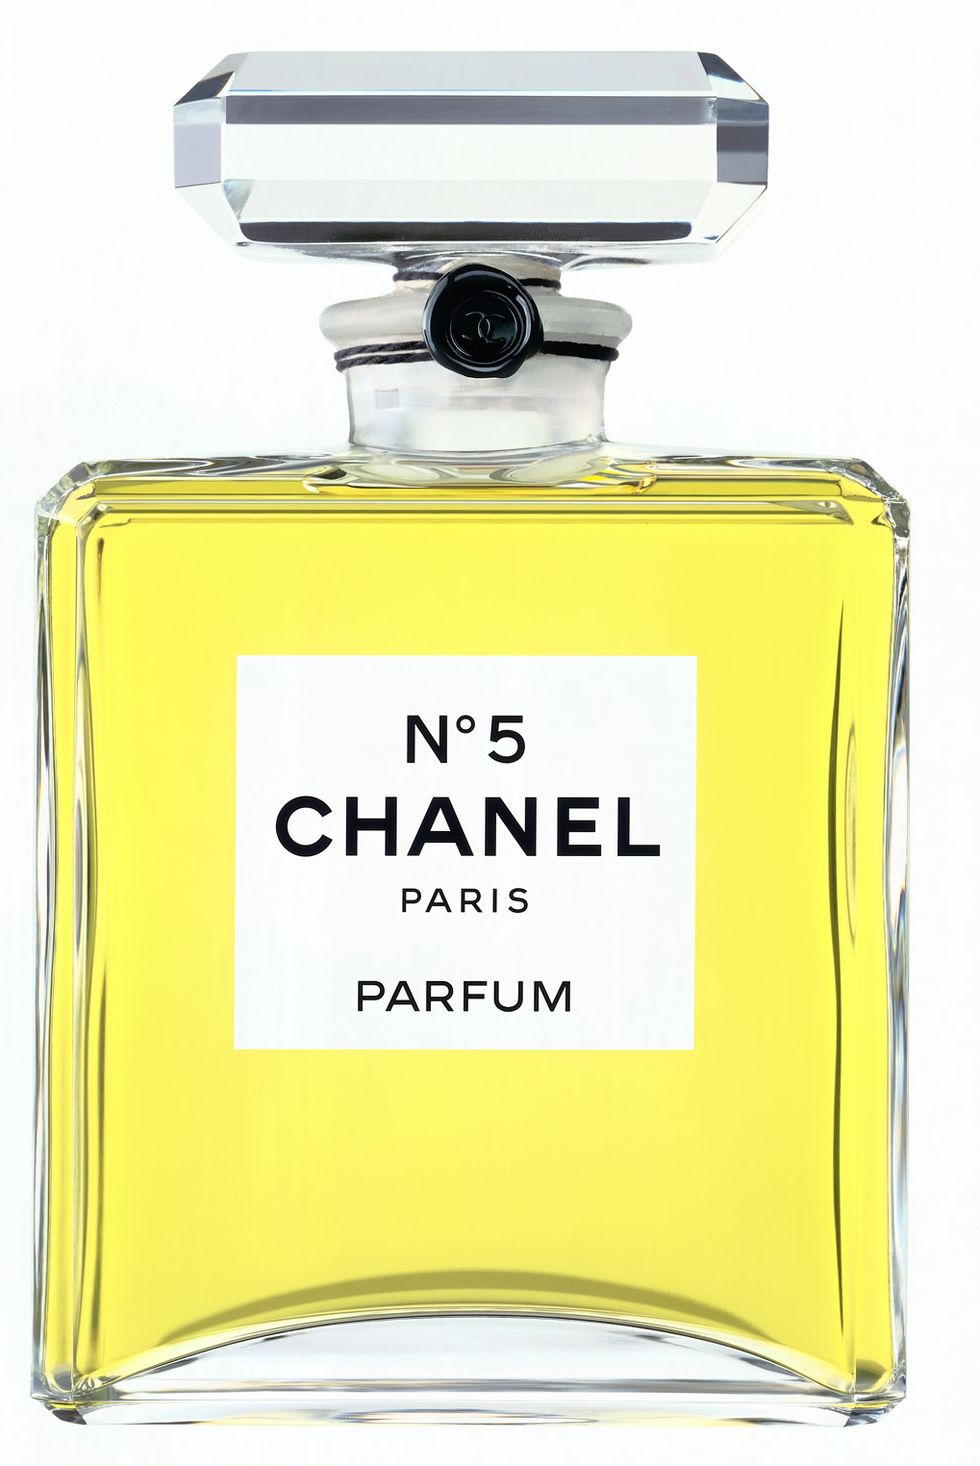 Best new Chanel No.5 dupes - cheap alternatives to the iconic fragrance